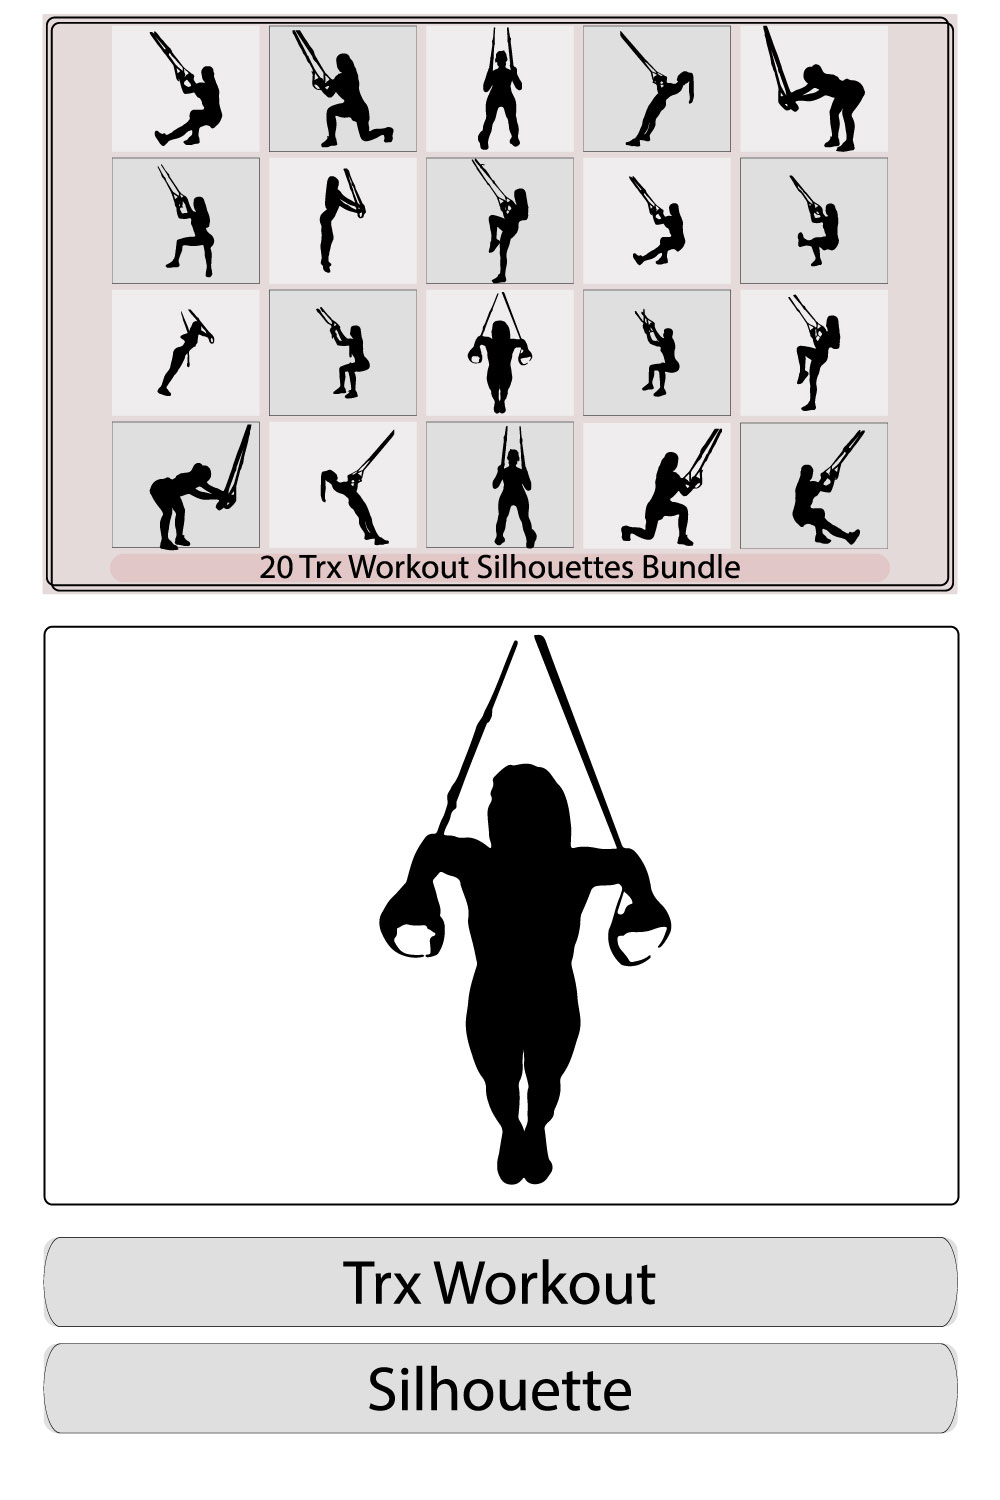 Silhouettes of men and women doing TRX exercises,Man workout using resistance band flat vector illustration,suspension training system TRX, vector illustration pinterest preview image.